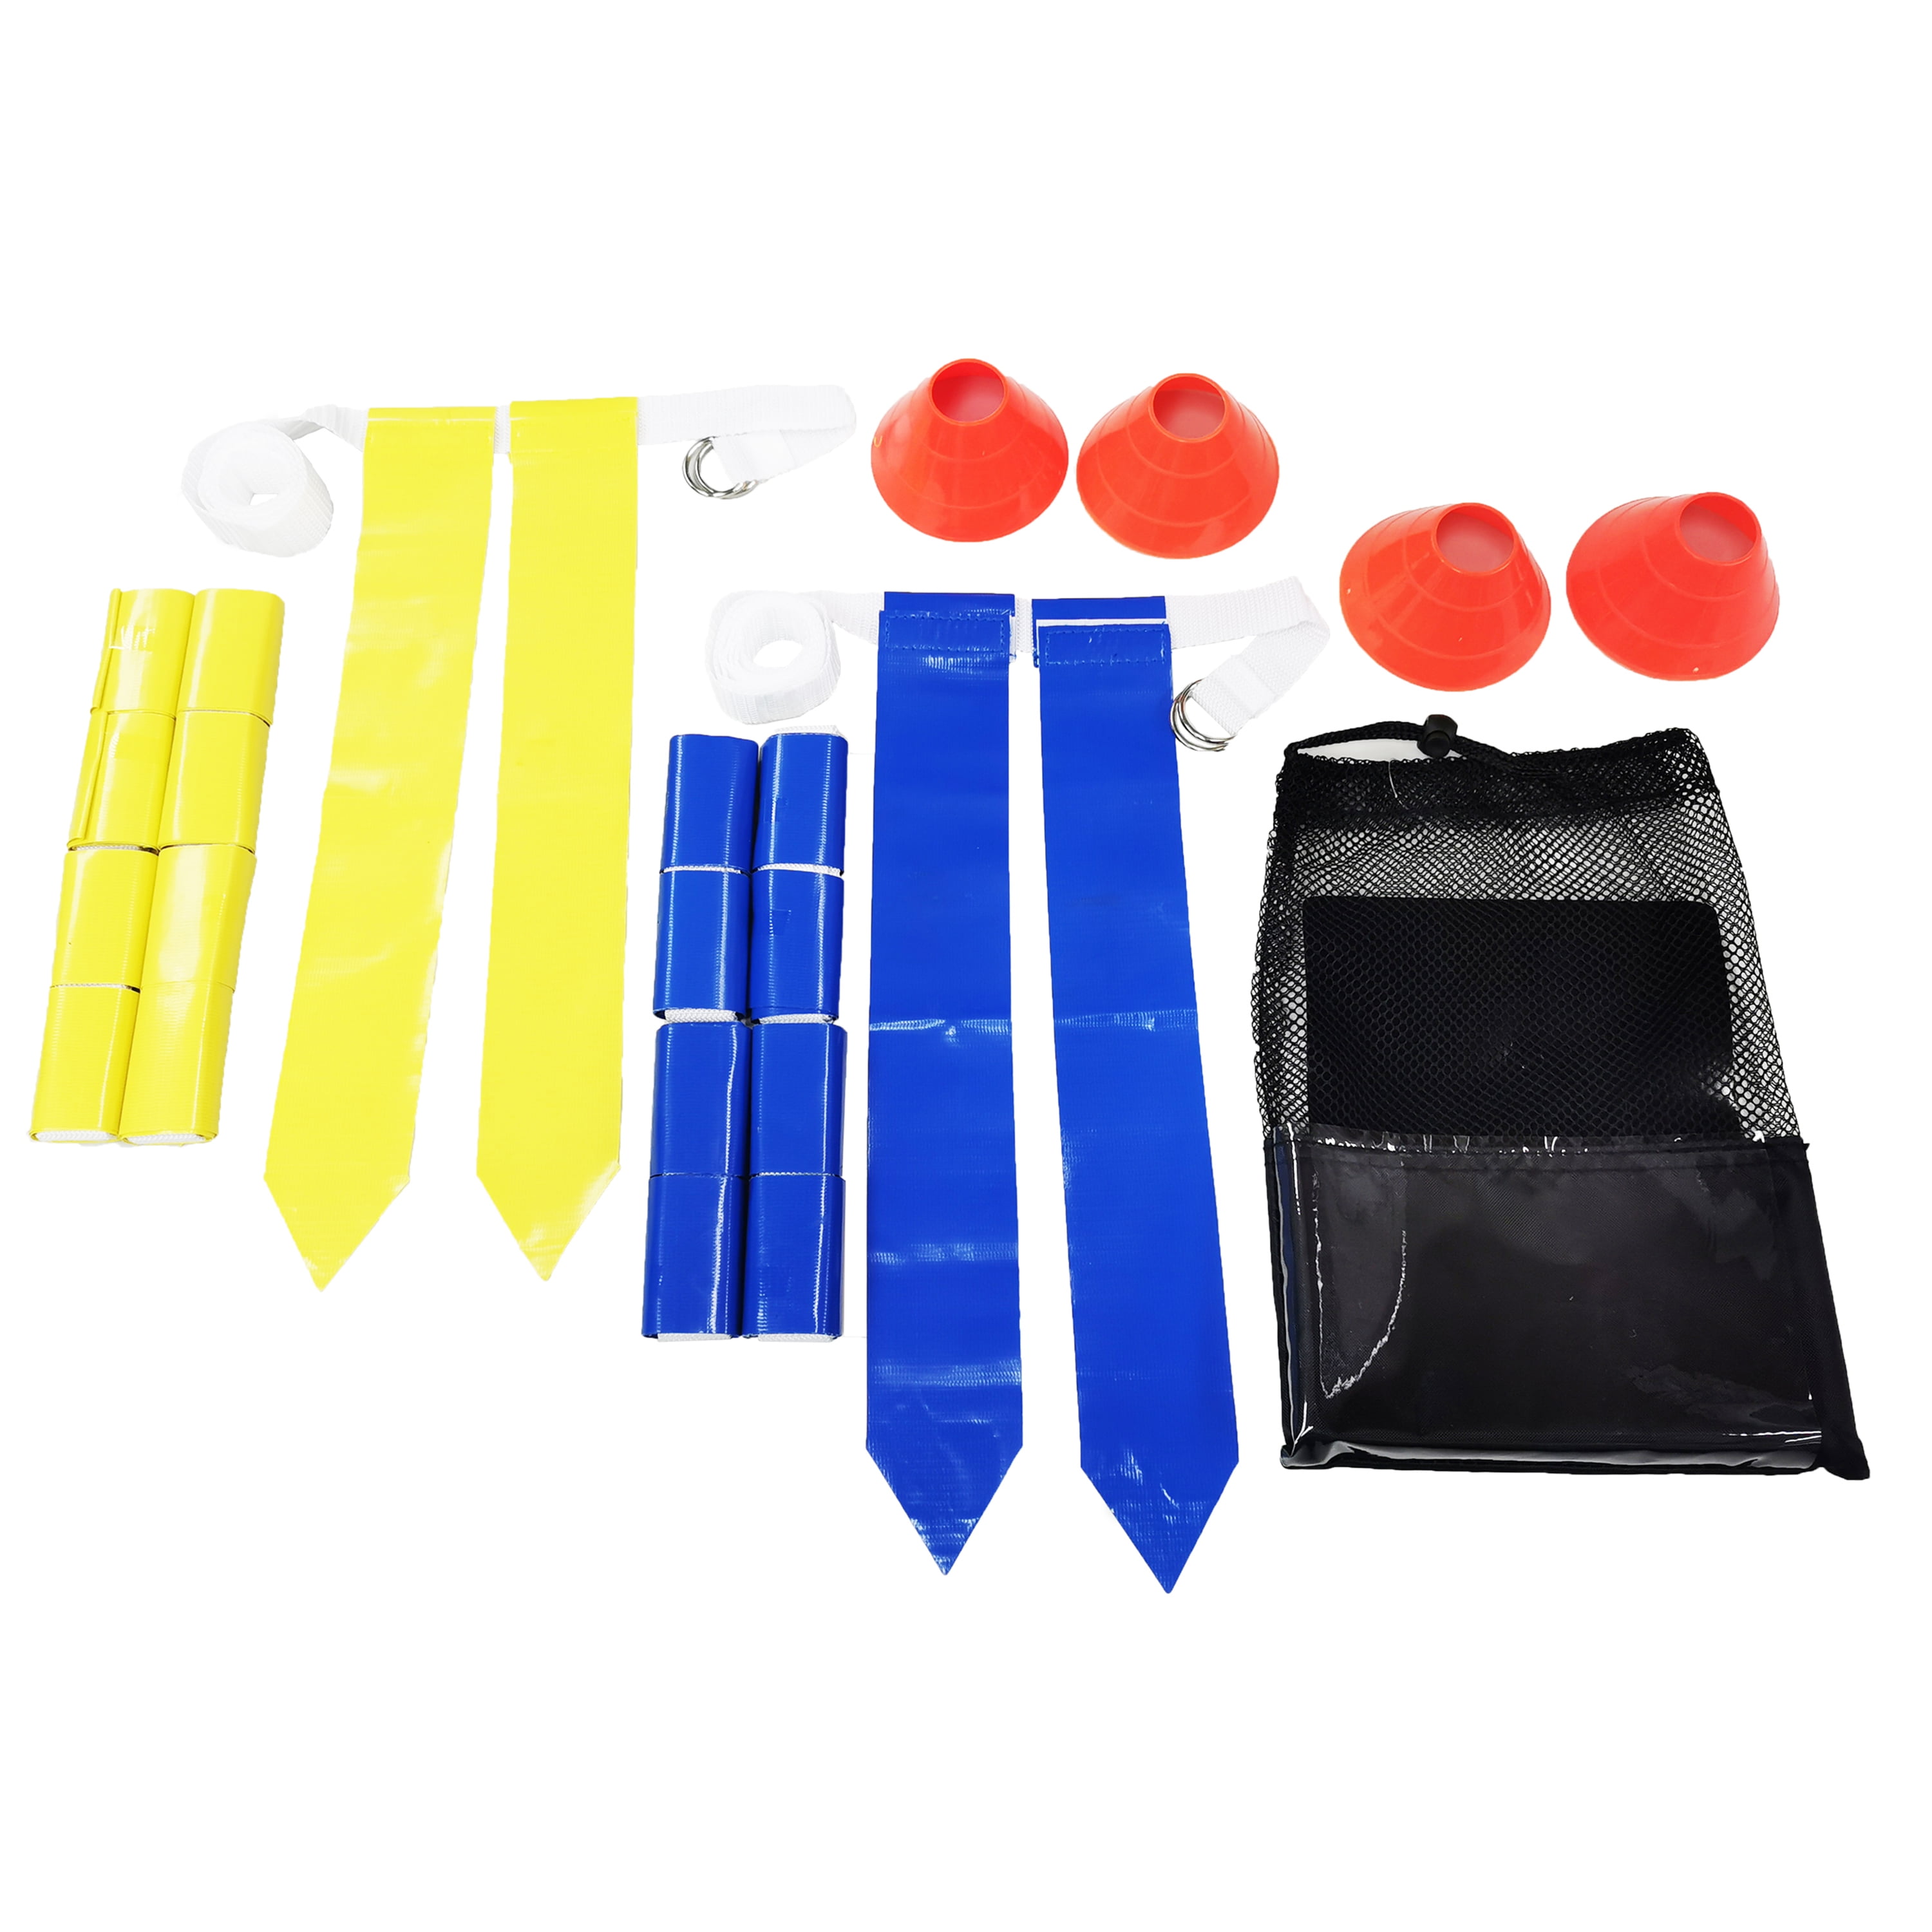 SKLZ 10-Man Flag Football Deluxe Set W/ Flags and Cones Pro Performance 0424 